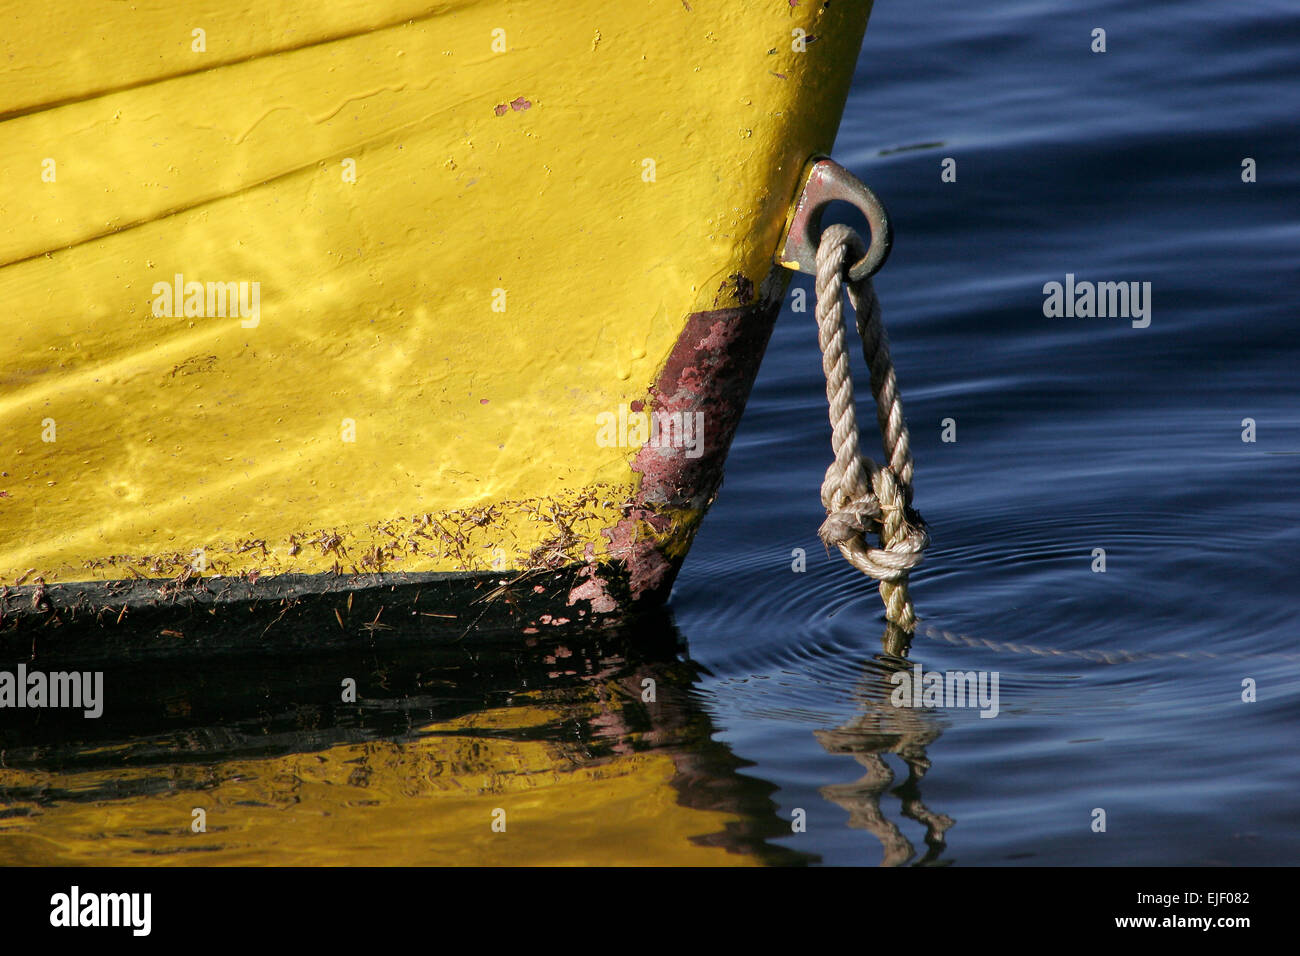 Close-up of yellow boat hull in water Stock Photo